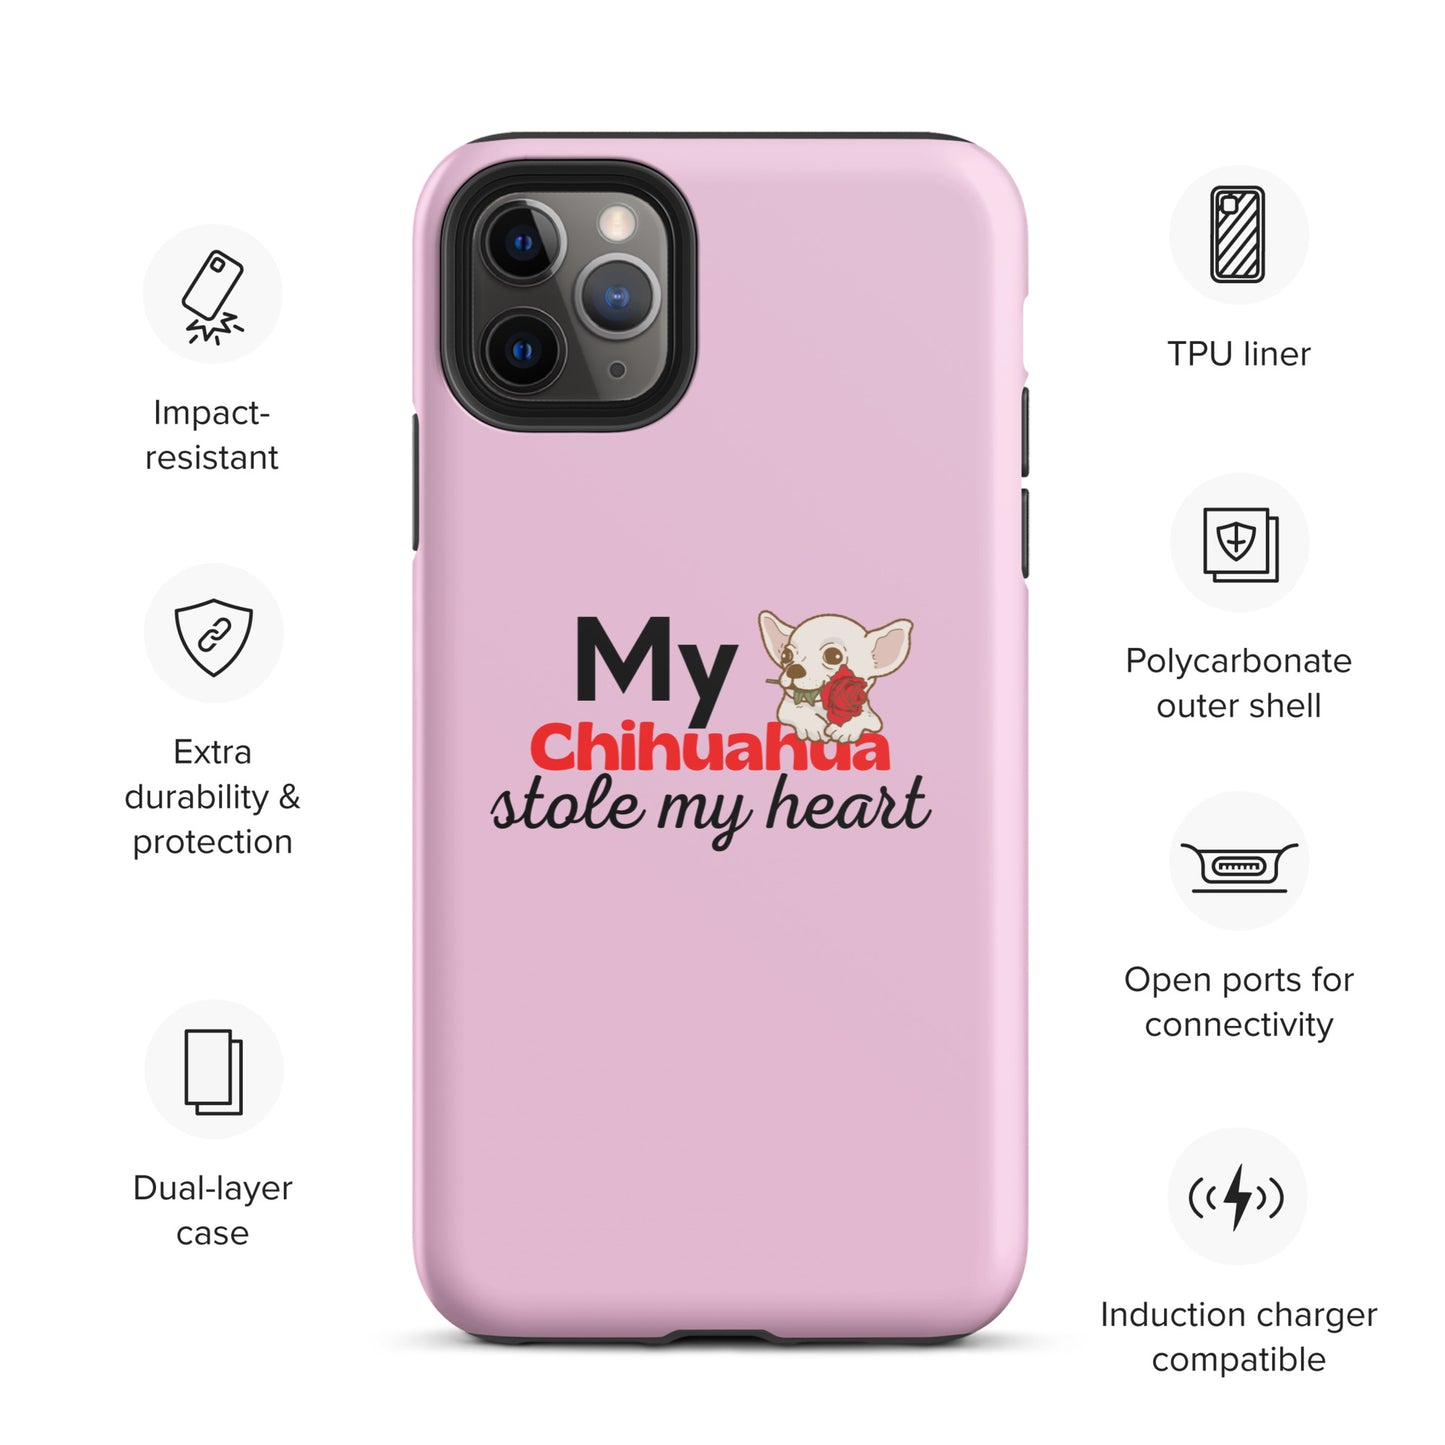 iPhone case 'My Chihuahua stole my heart' Pink